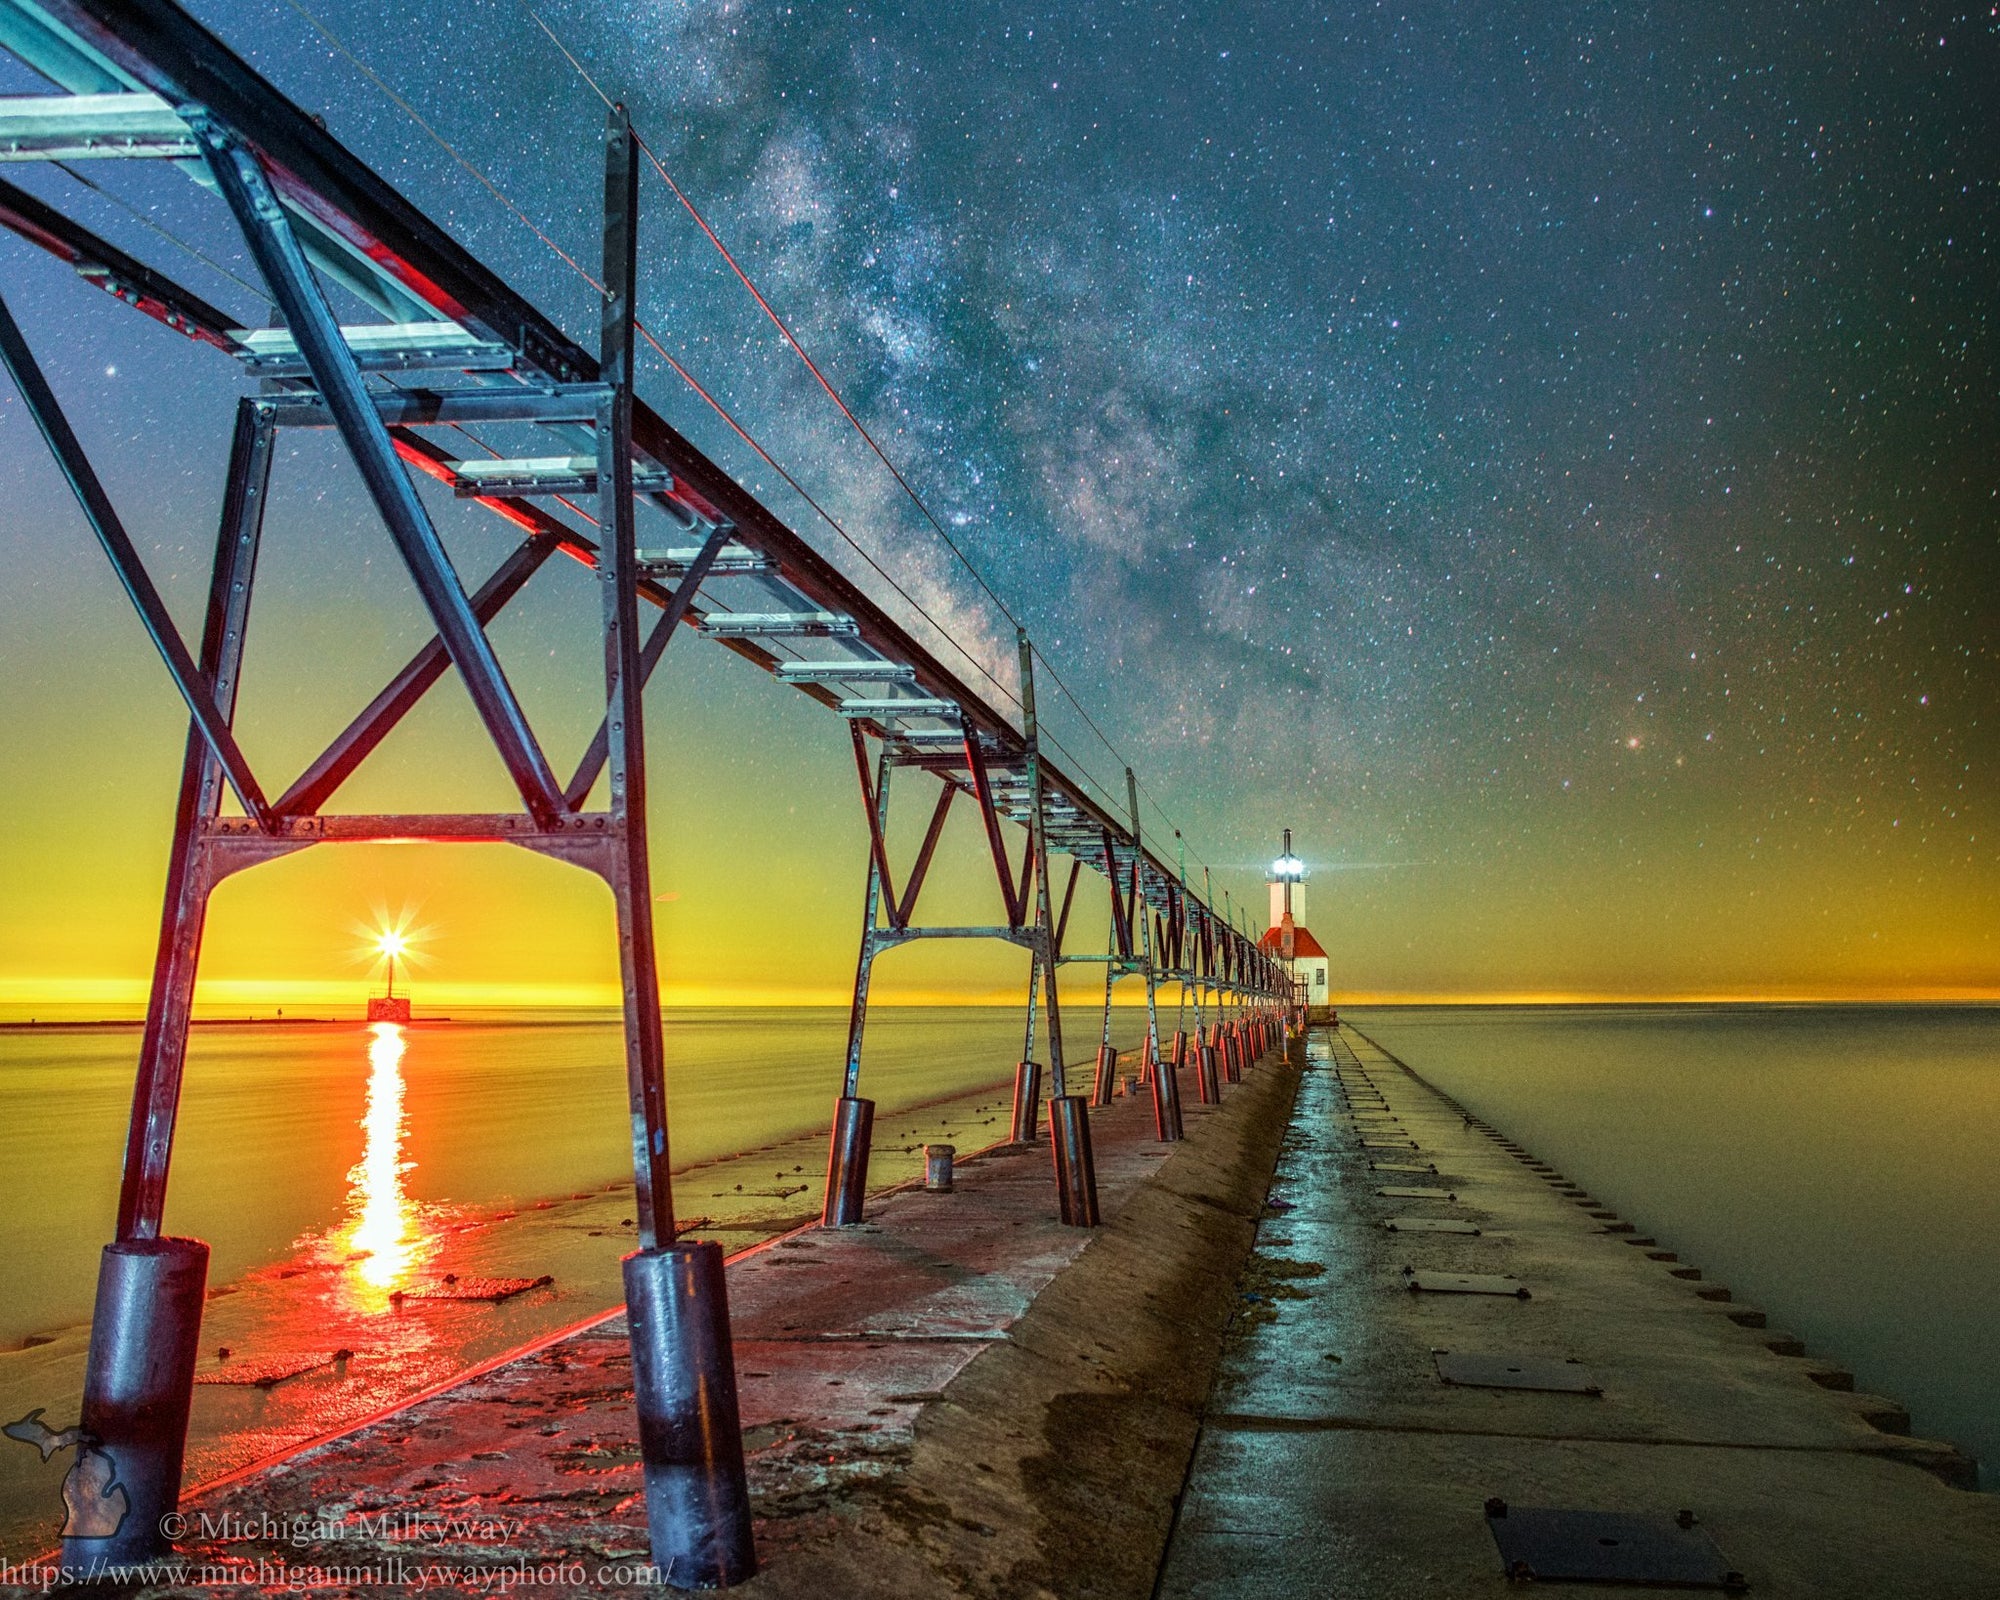 Lighthouses collection by Michigan Milkyway